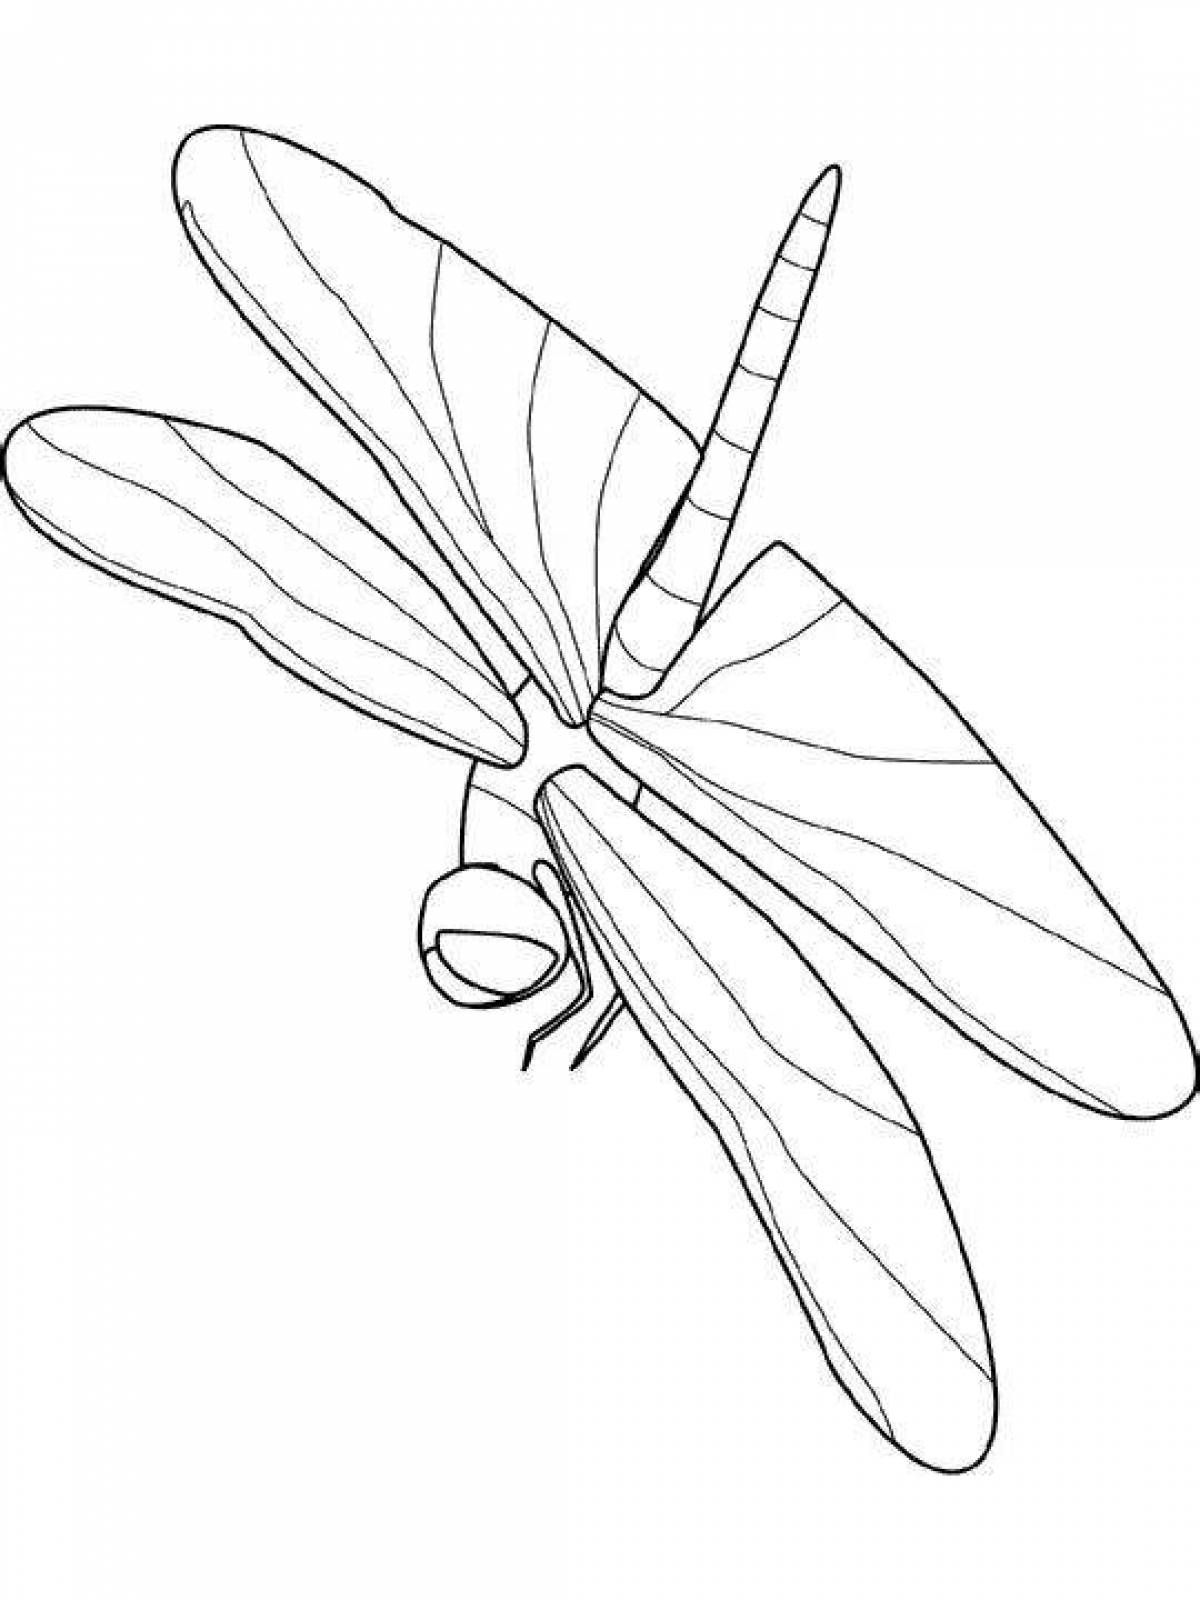 Outstanding dragonfly coloring page for kids